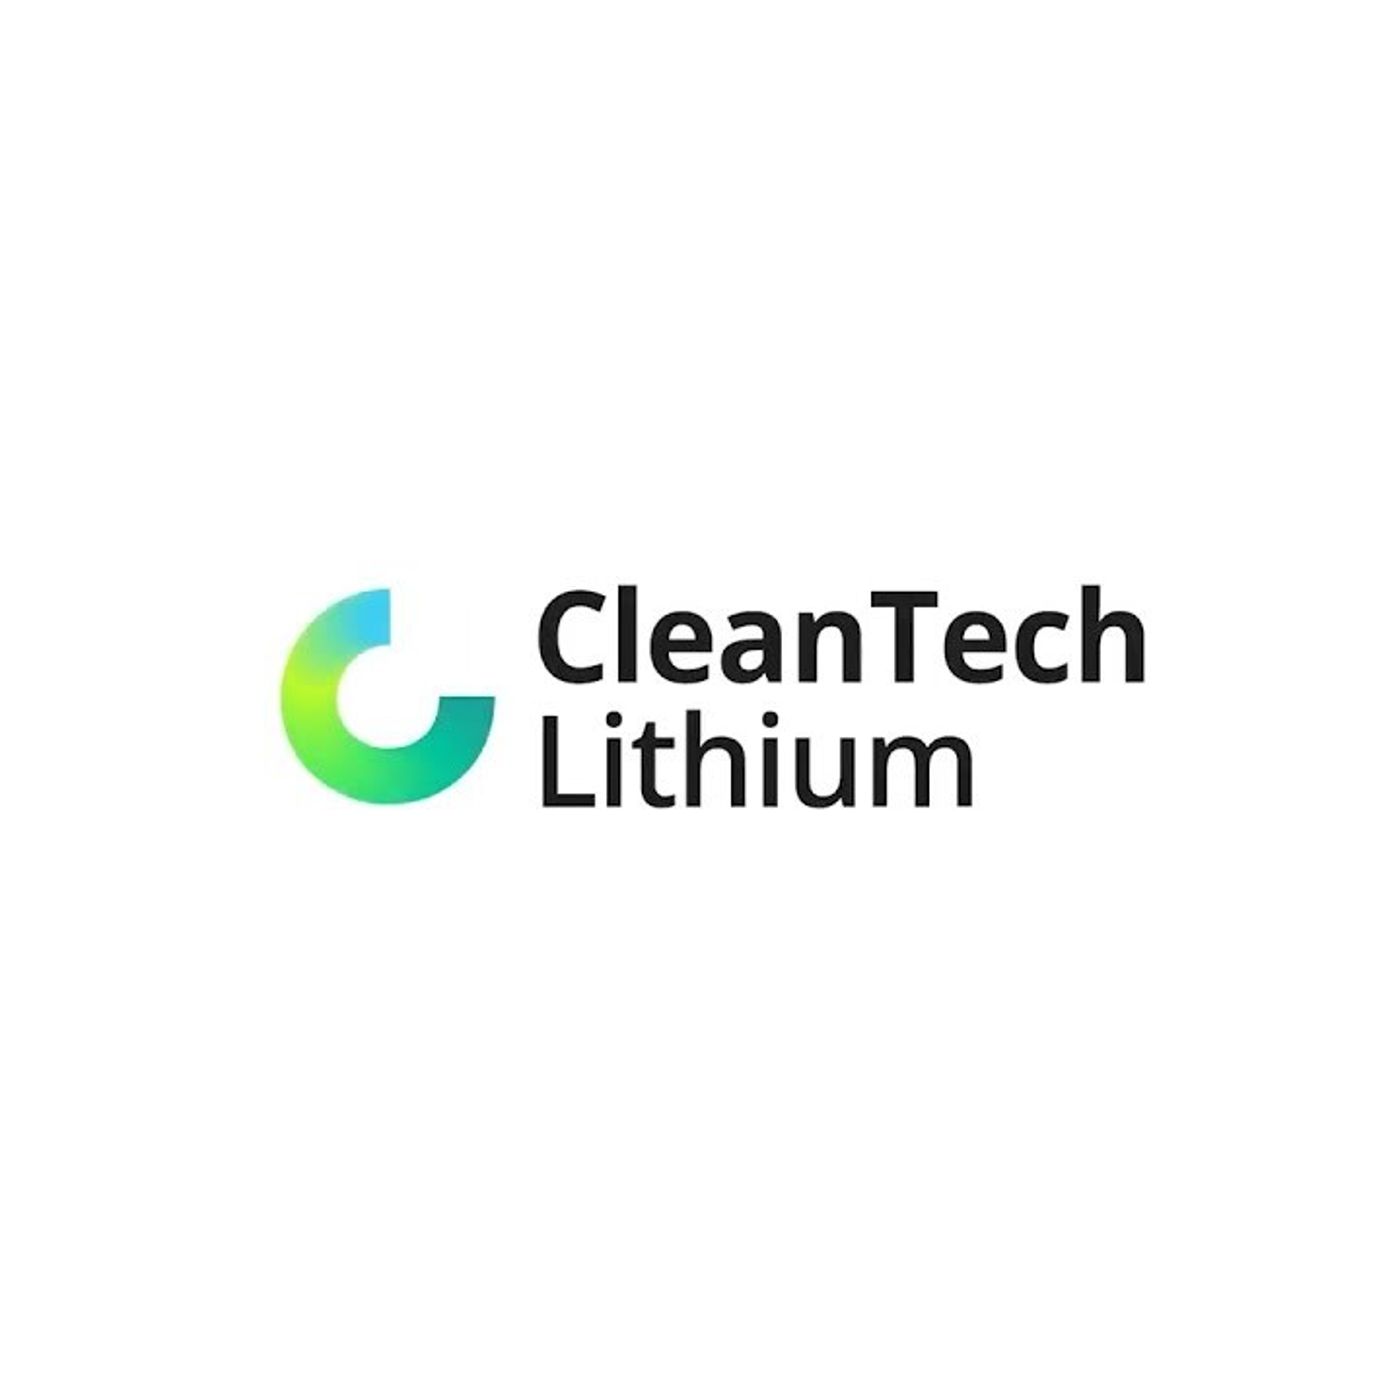 1820: CleanTech Lithium’s Steve Kessler: “this puts us in the best position to enter substantive discussions with offtake partners”